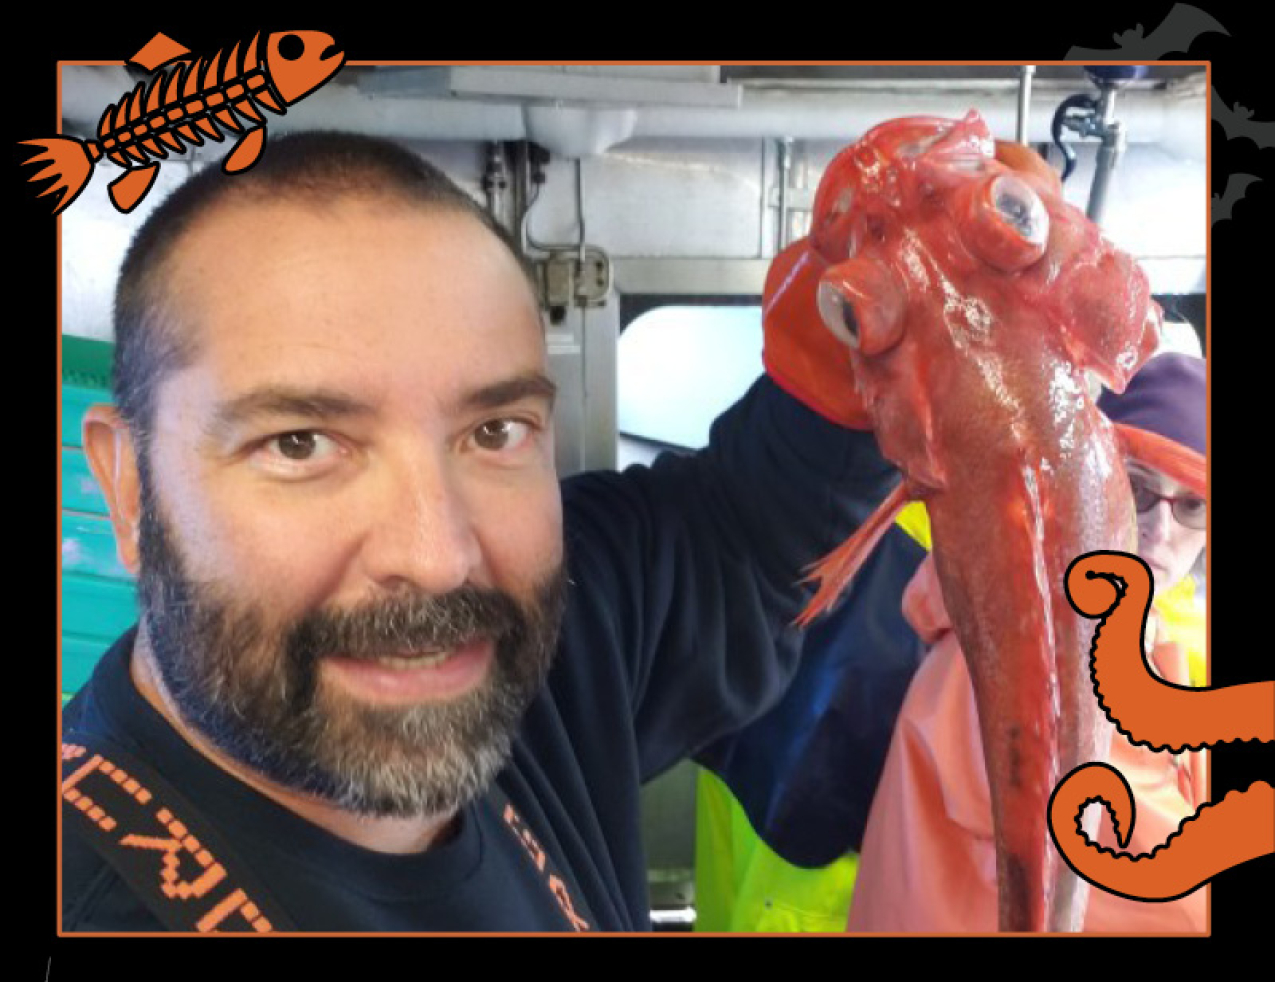 Phil Moorhouse holds up a red Vermilion rockfish with bulging white eyes. Border of the photo is black with orange sea creature graphics of octopus tentacles and a fish skeleton. Text: Look what the net dragged in #NOAASpookyScience with NOAA logo.